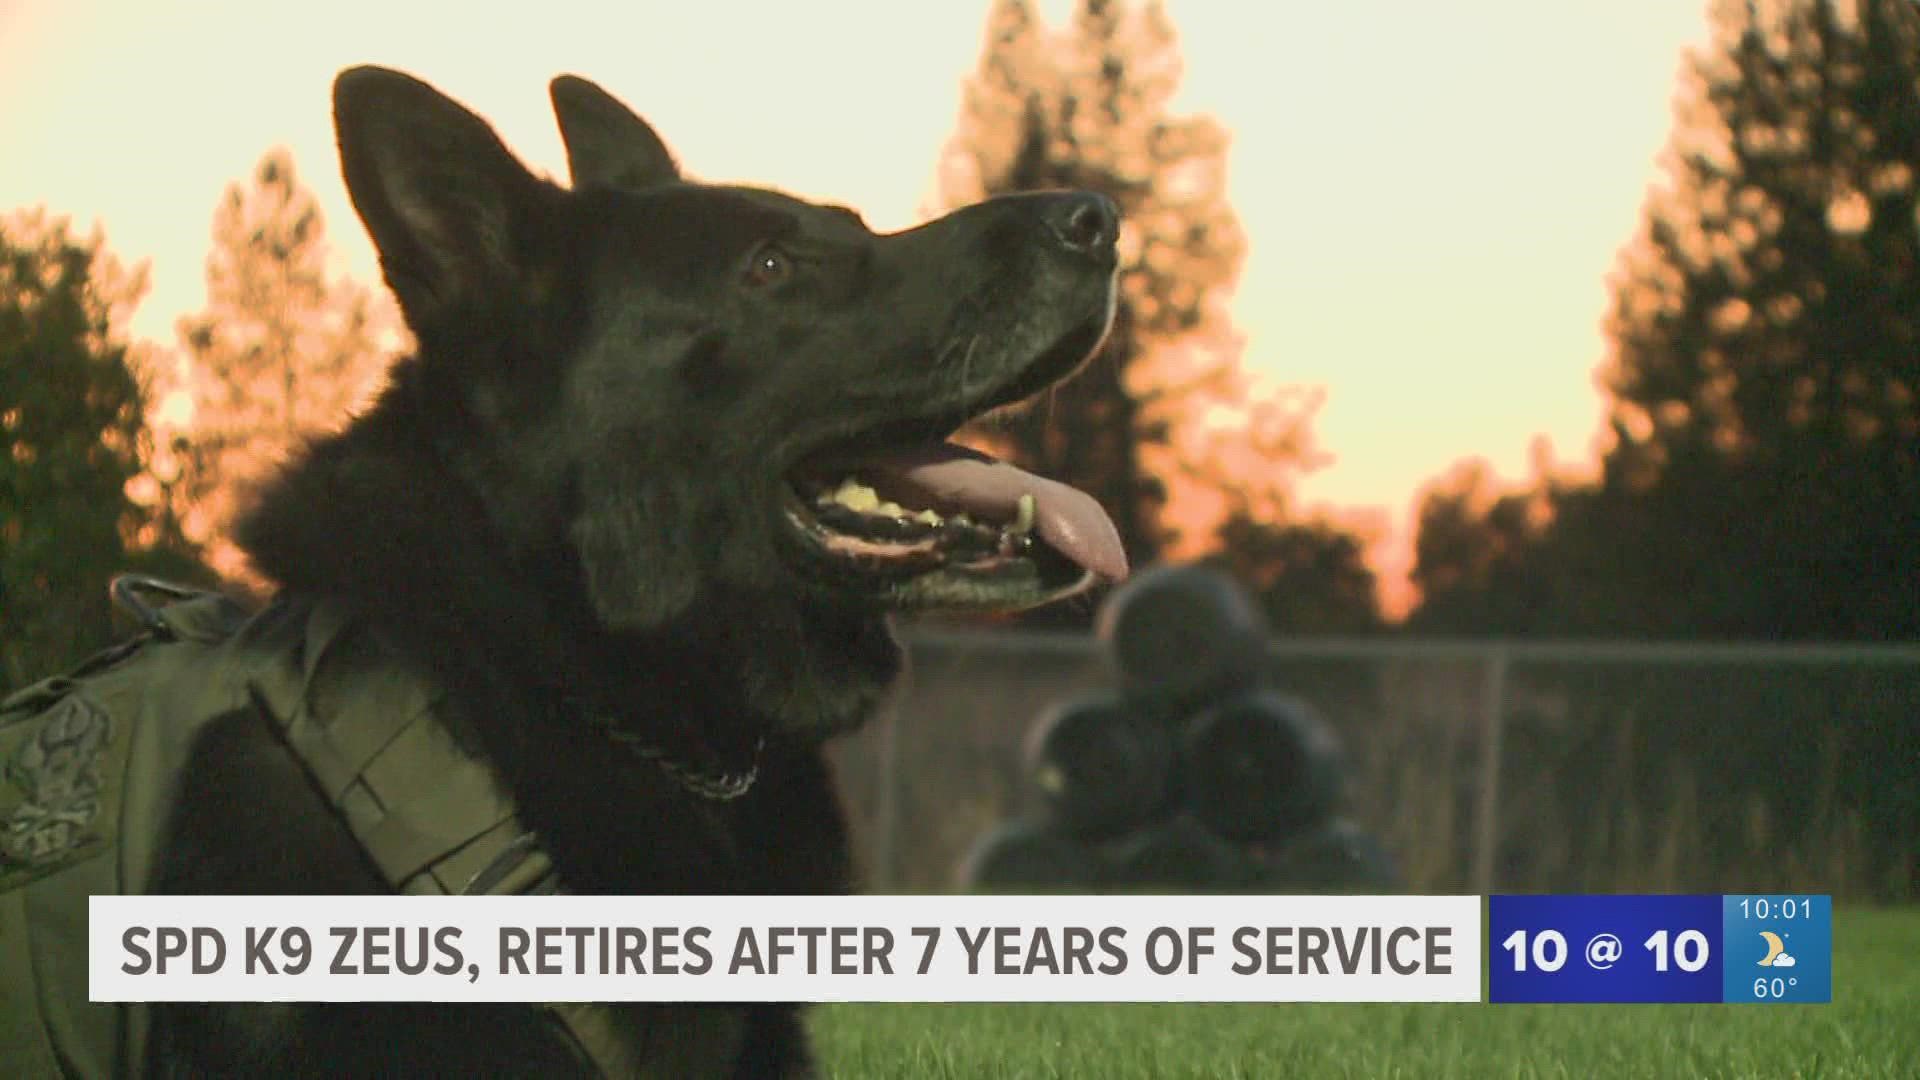 Since 2015, Zeus has helped keep citizens and officers safe. The German Shepherd has been deployed more than 1,500 times and helped capture nearly 400 suspects.